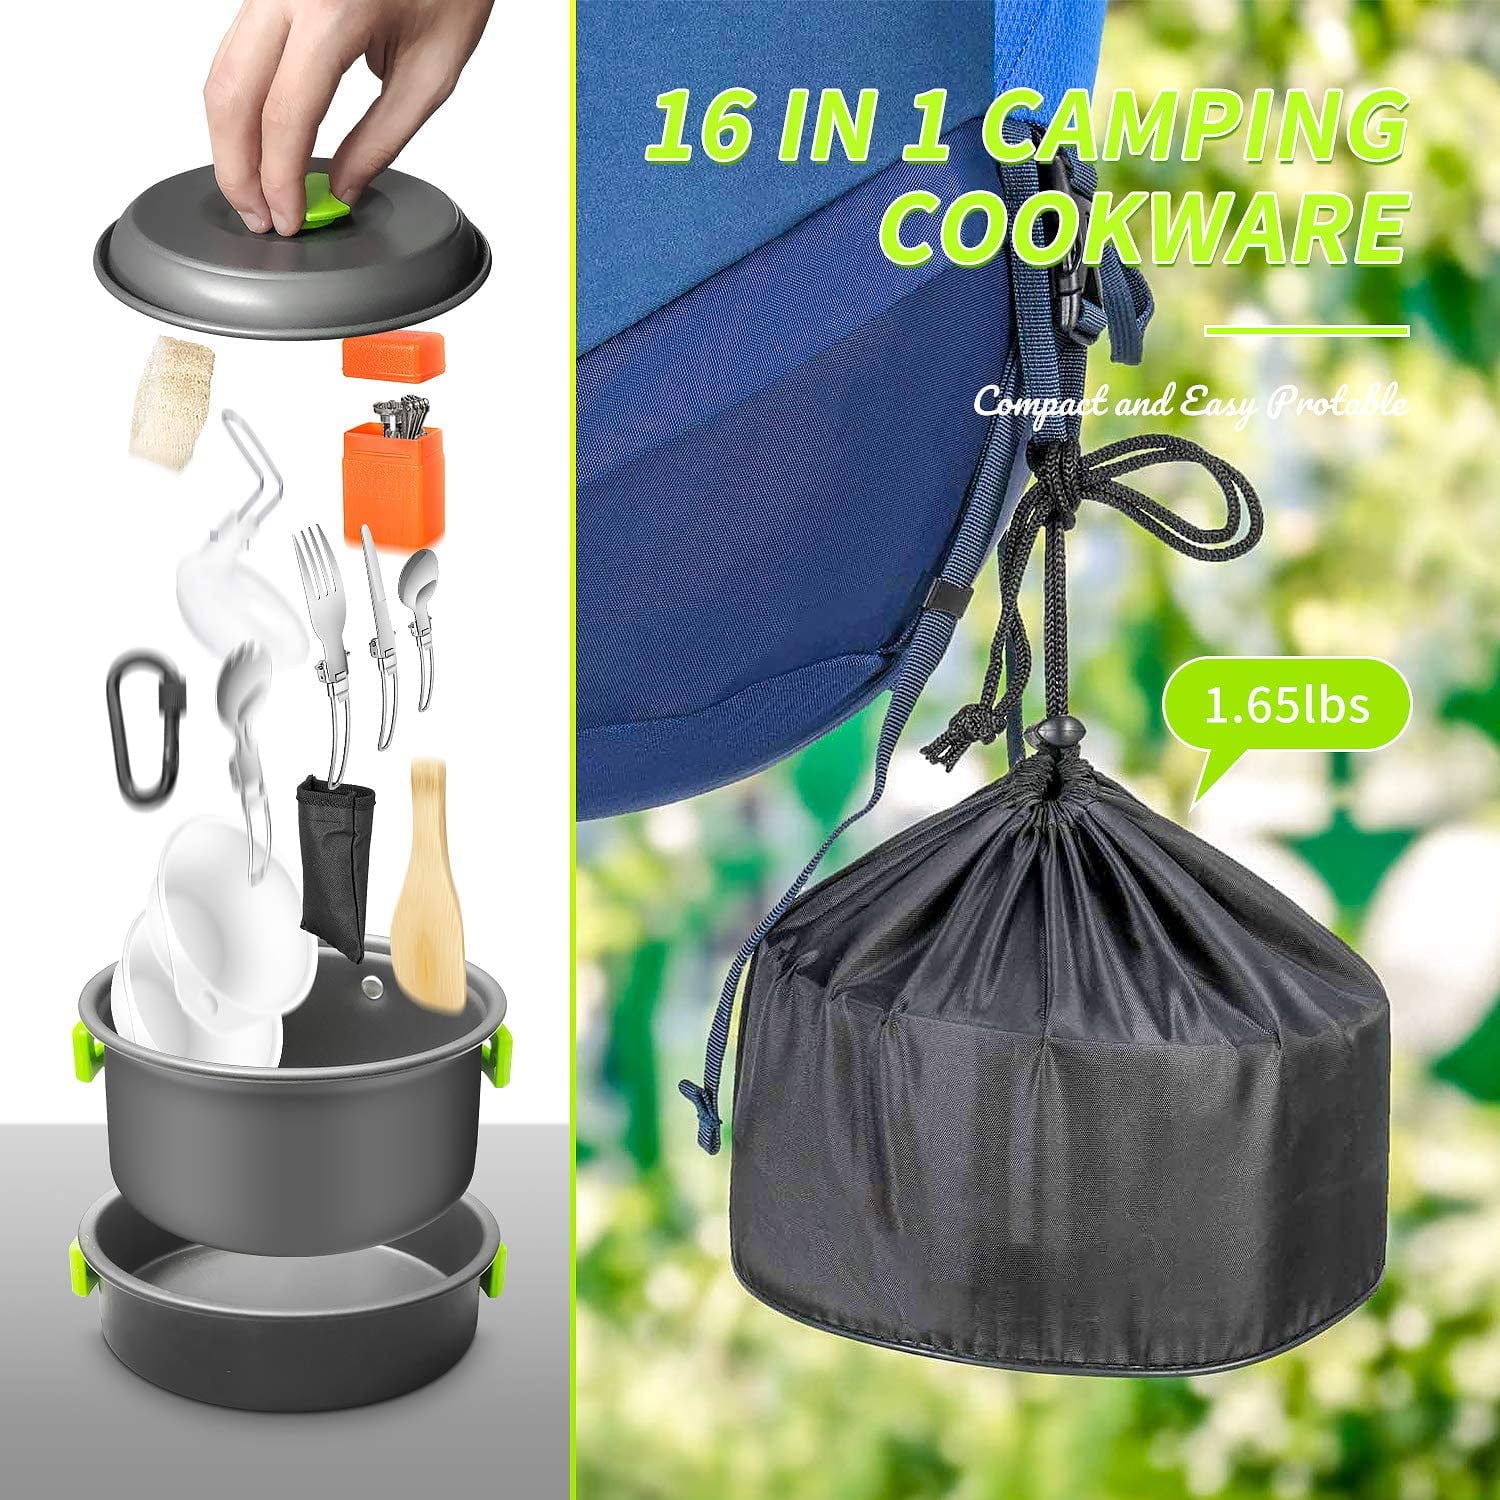 16 Pcs Camping Cookware Set Stove Canister Stand Tripod Outdoor Hiking Picnic Non-Stick Cooking Backpacking with Folding Knife and Fork Set Mess Kit